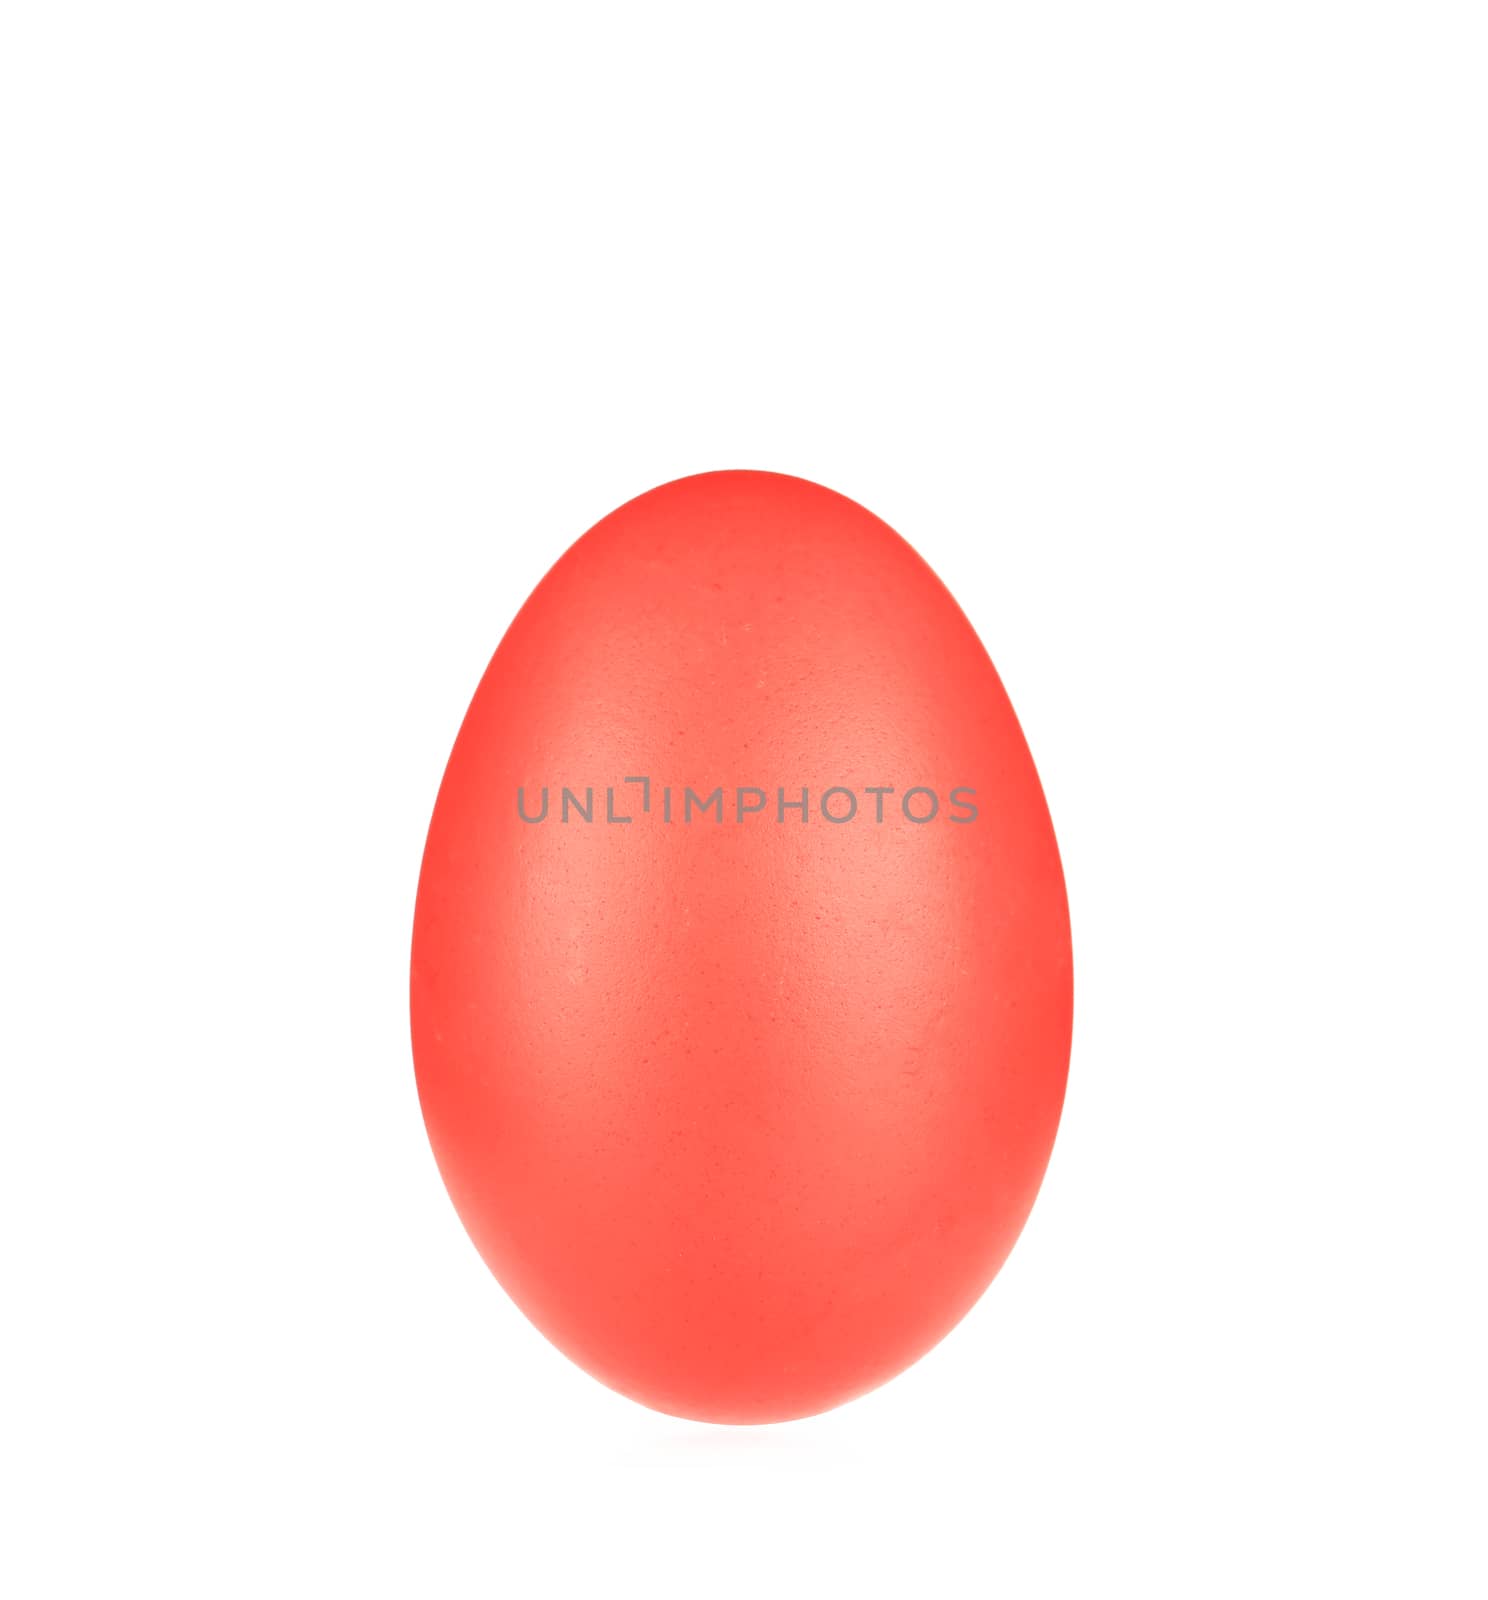 Red easter egg close up. Isolated on white with background.